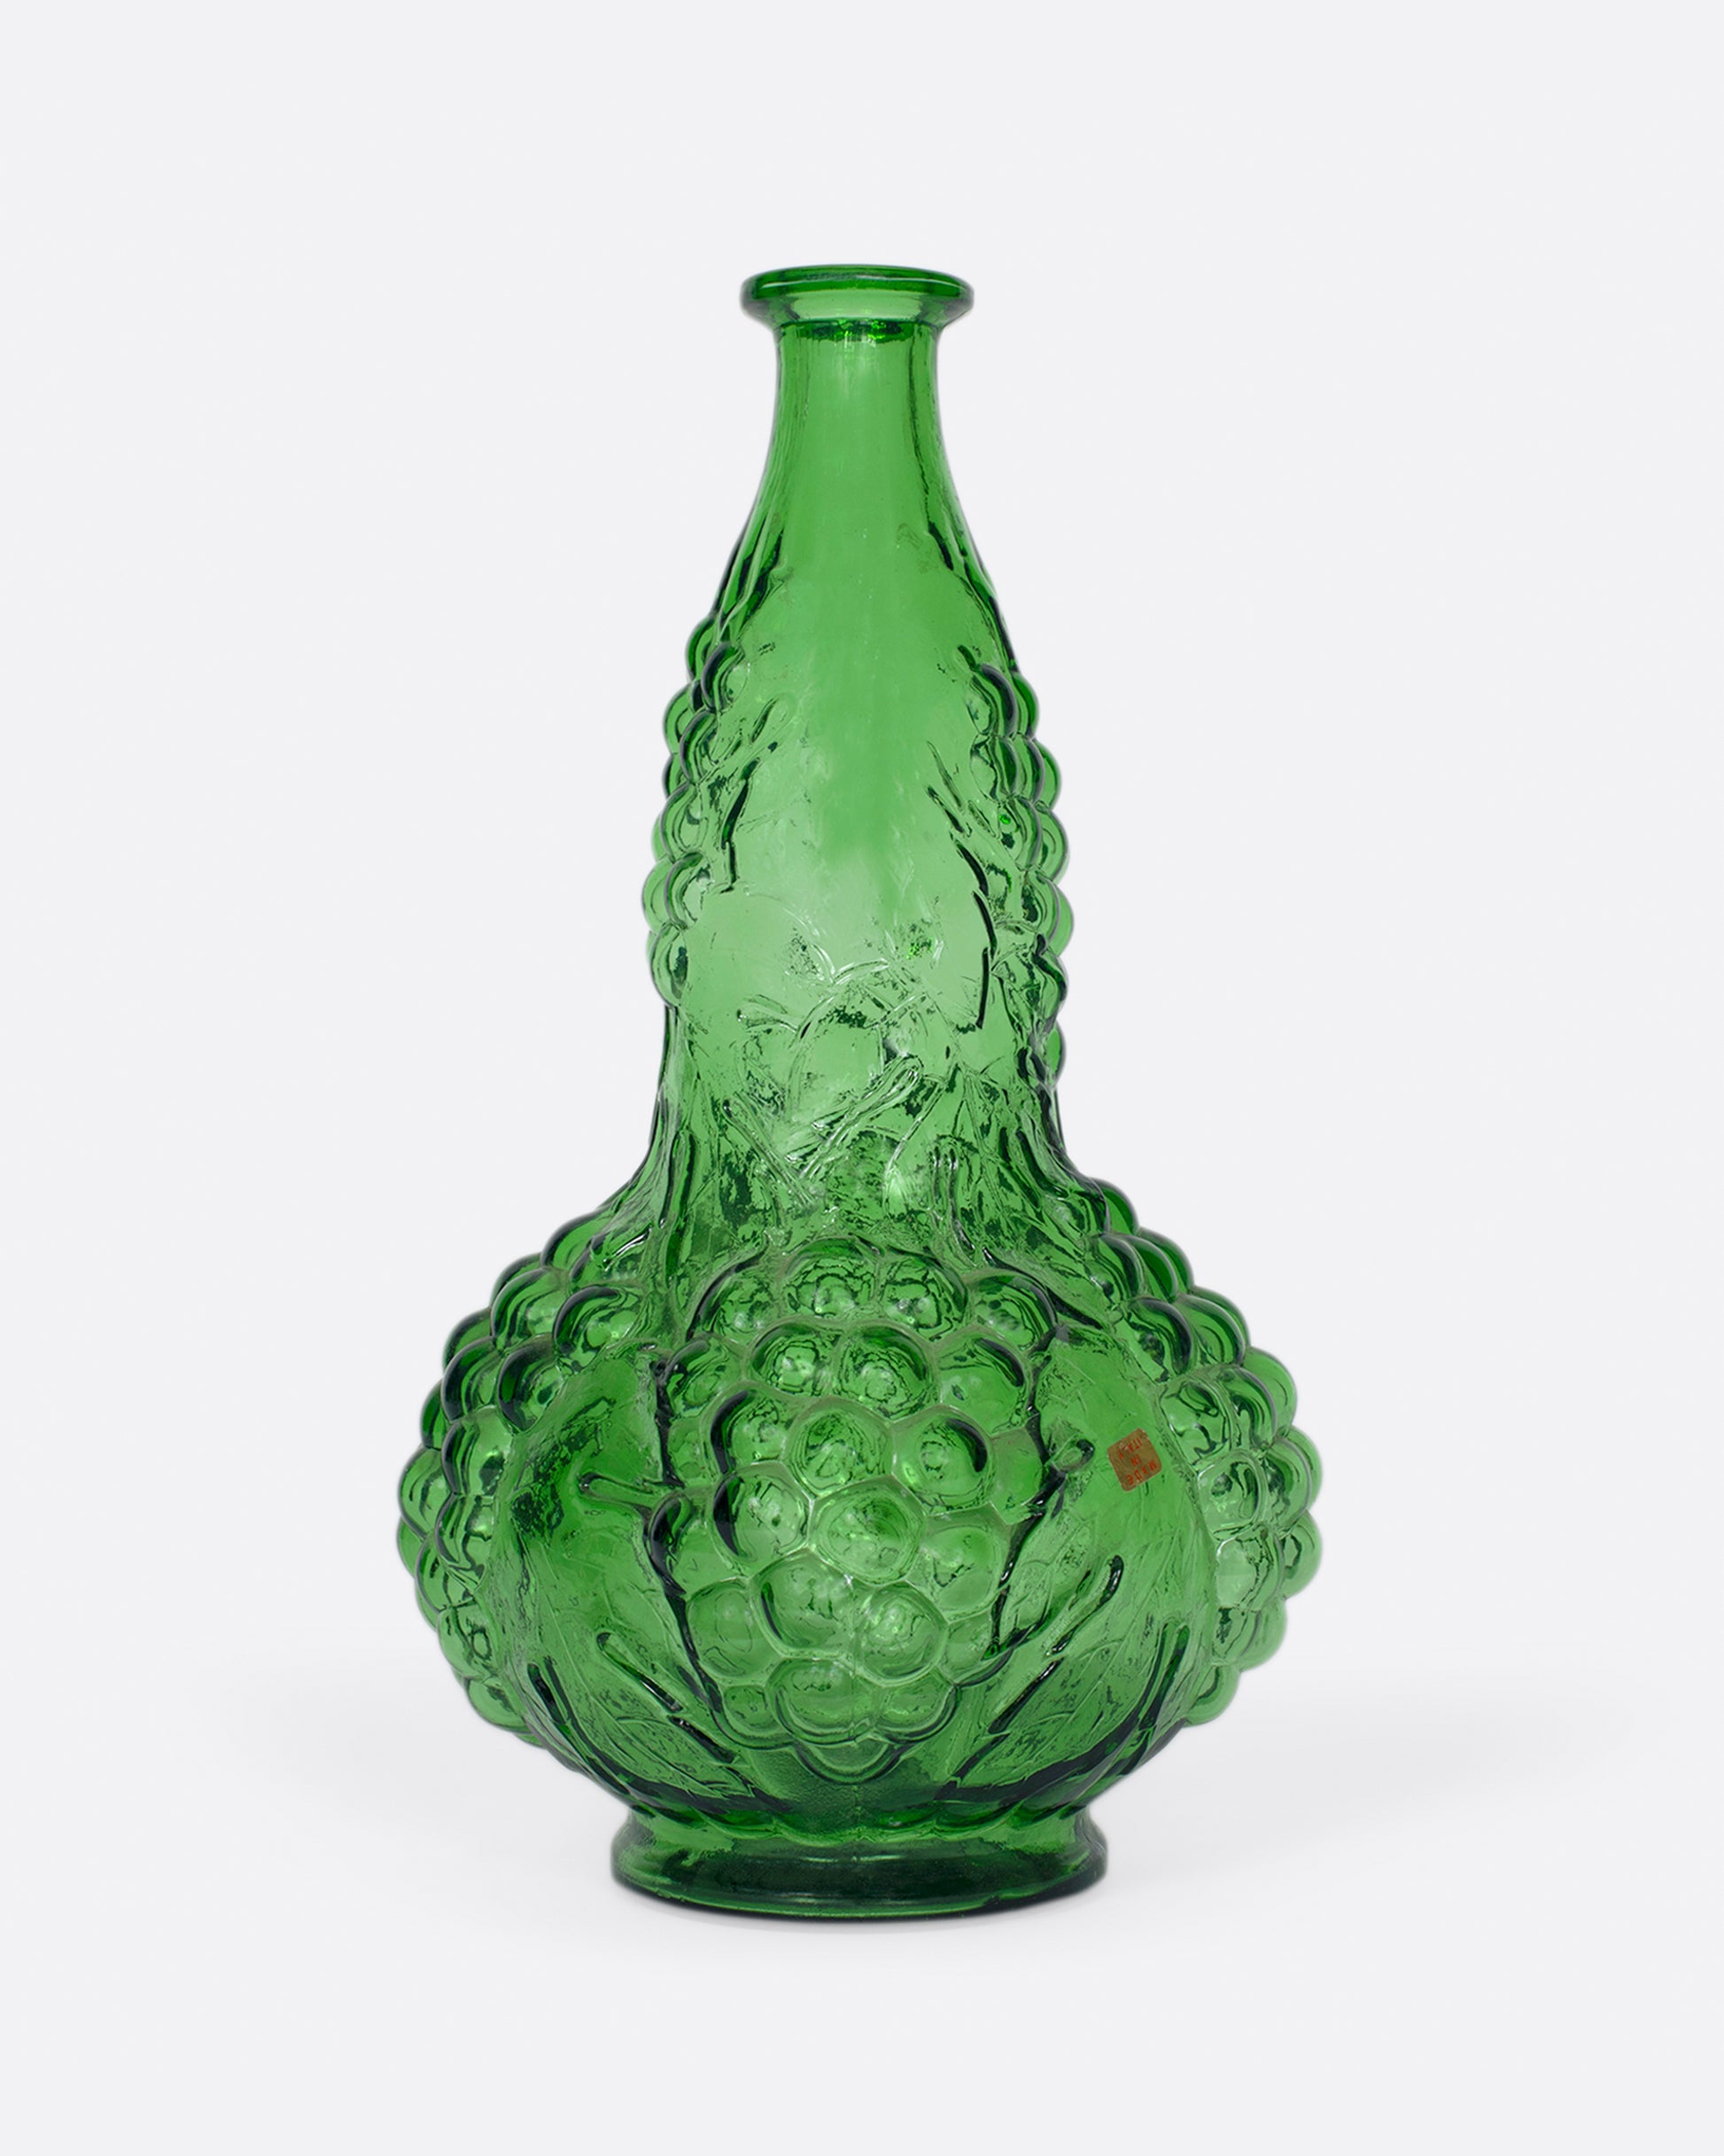 A tall, bottle green glass decanter with a textured stopper.